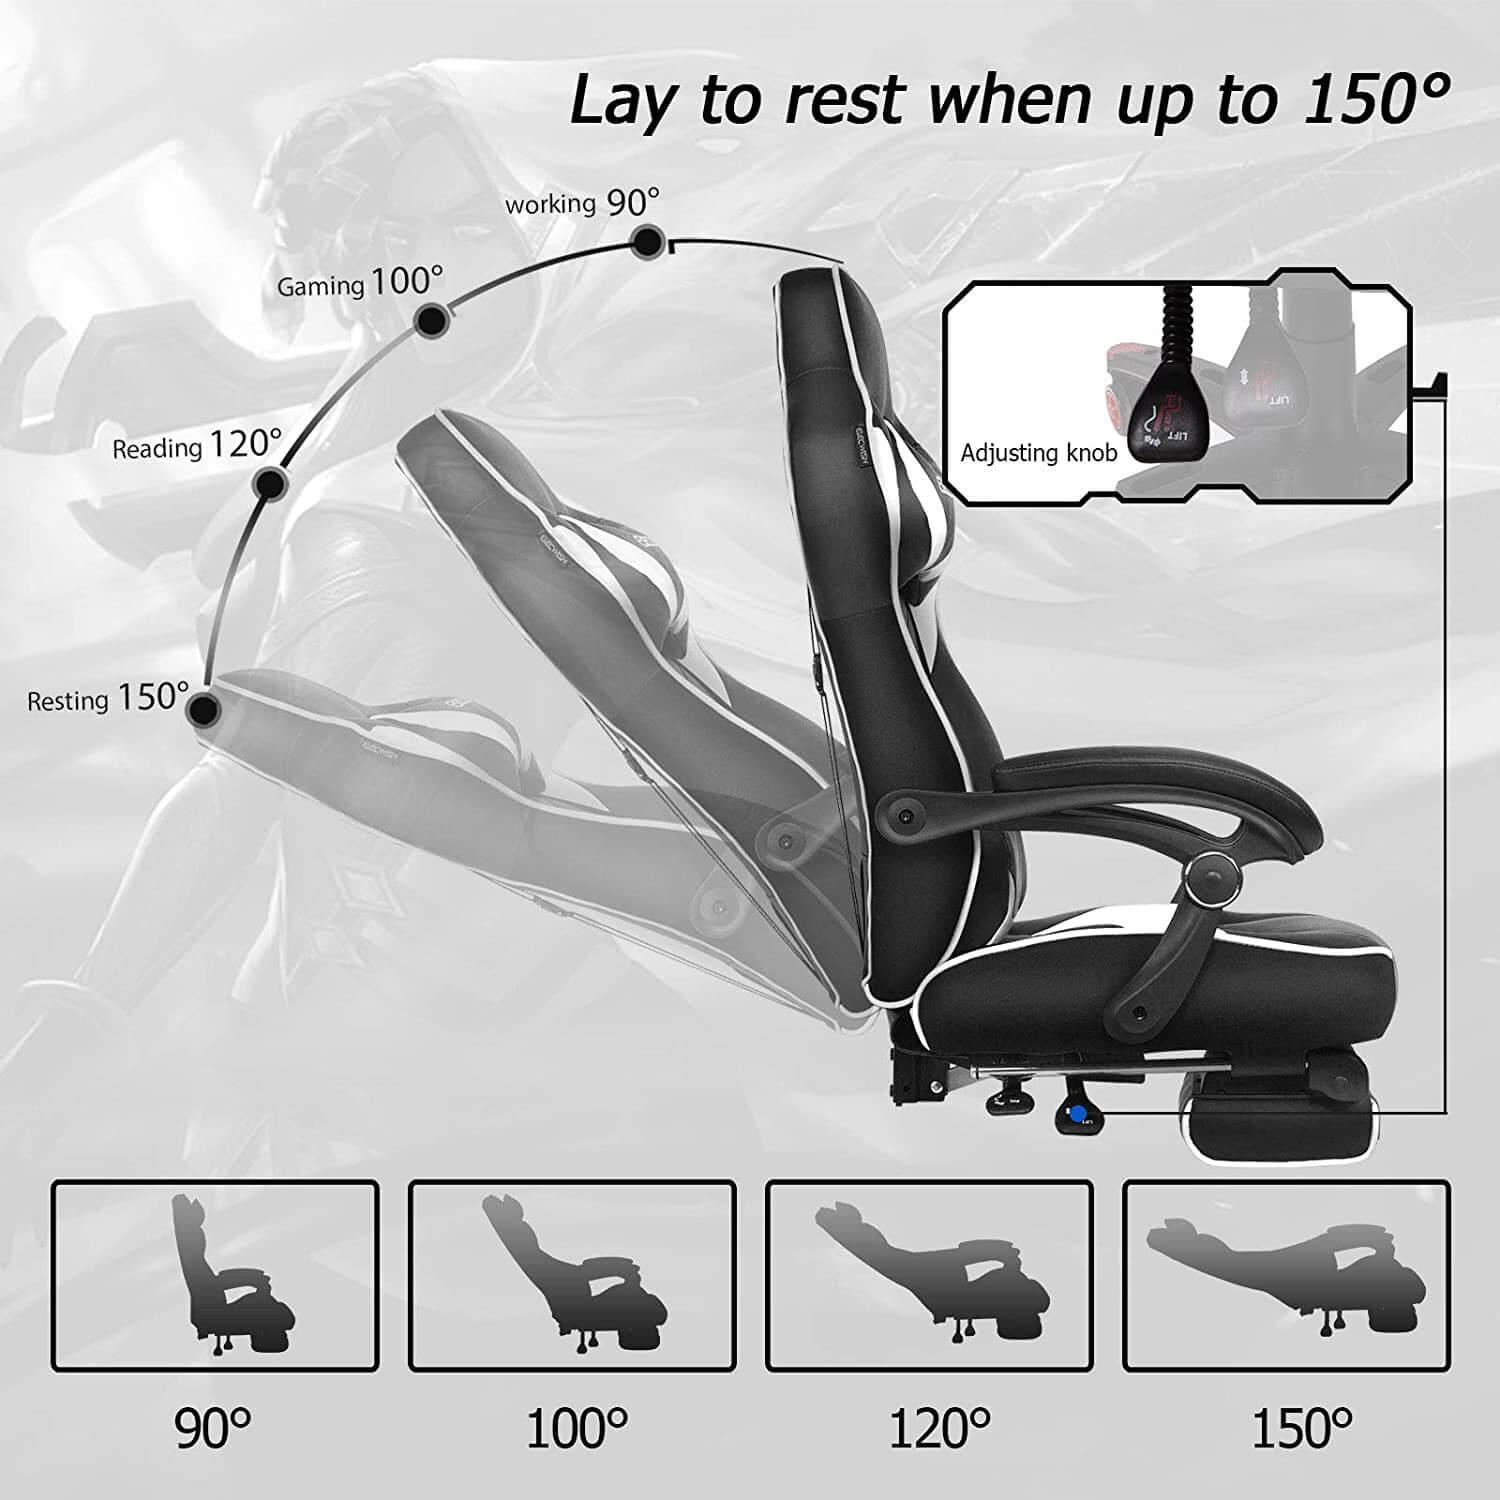 Elecwish white massage gaming chair with footrest OC112 can lay to rest when up to 150°